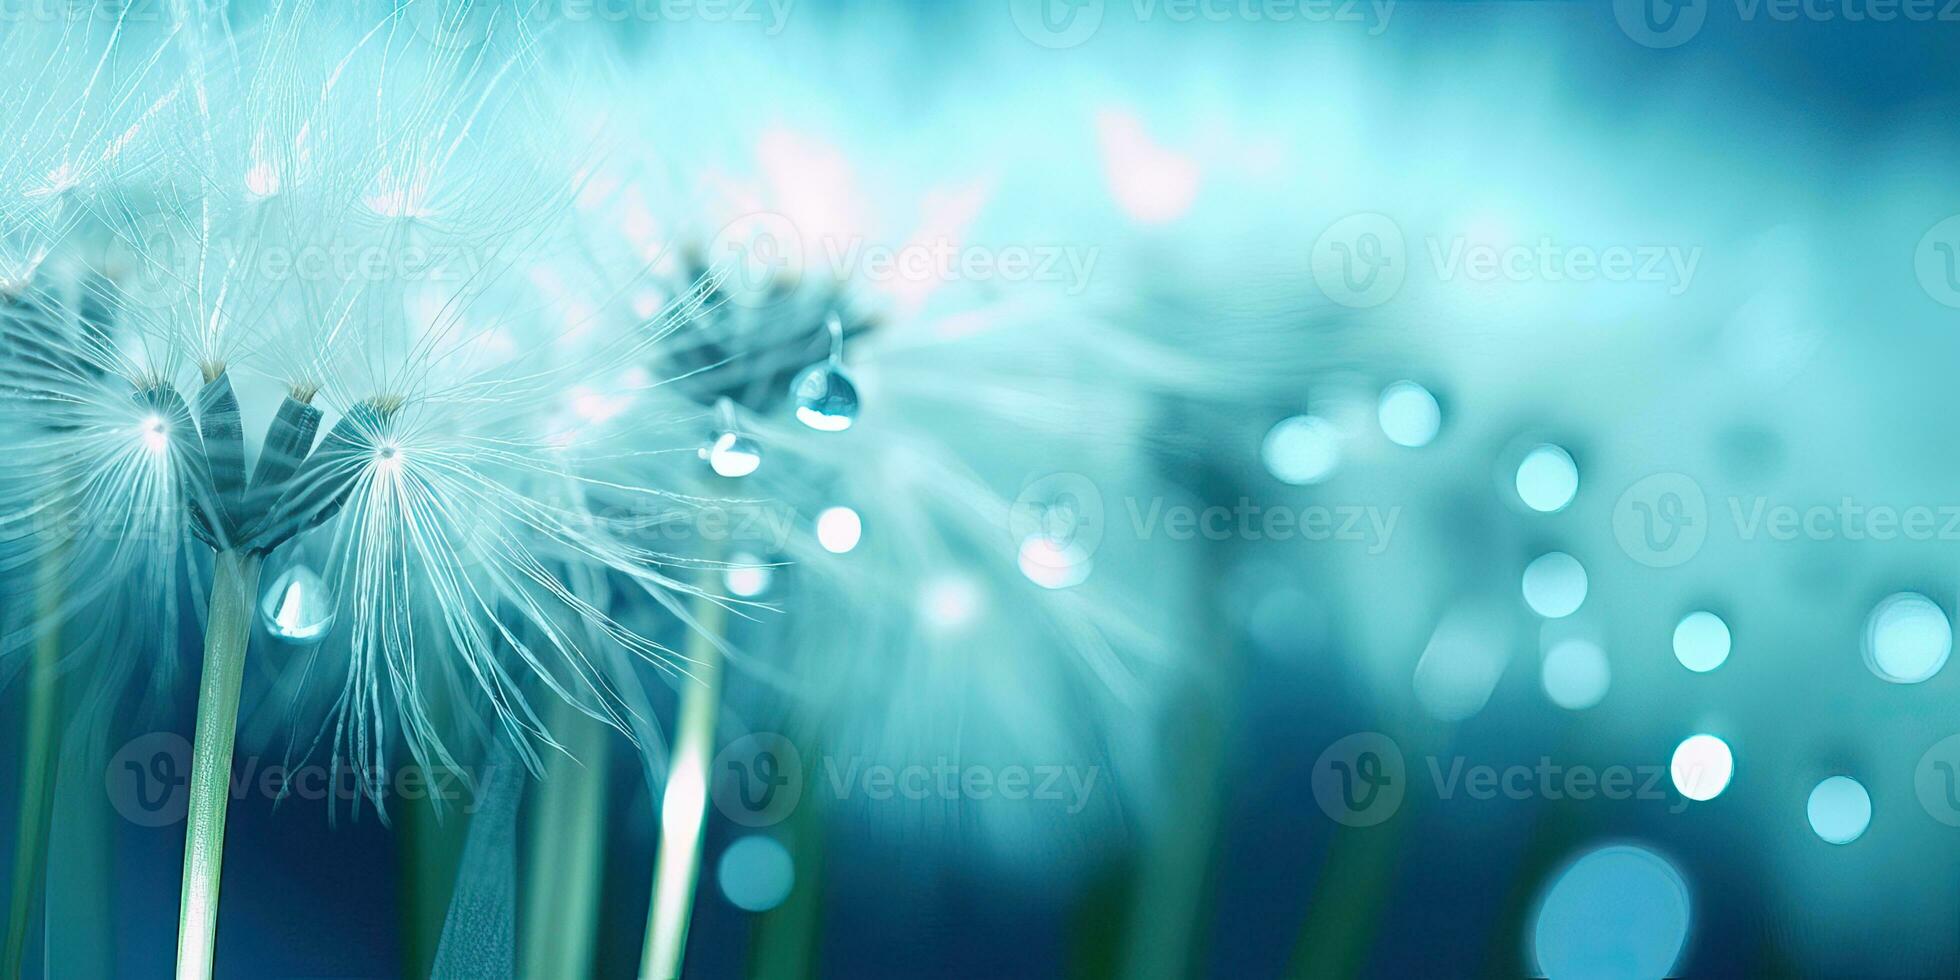 AI generated Dandelion Seeds in droplets of water on blue and turquoise beautiful background with soft focus in photo